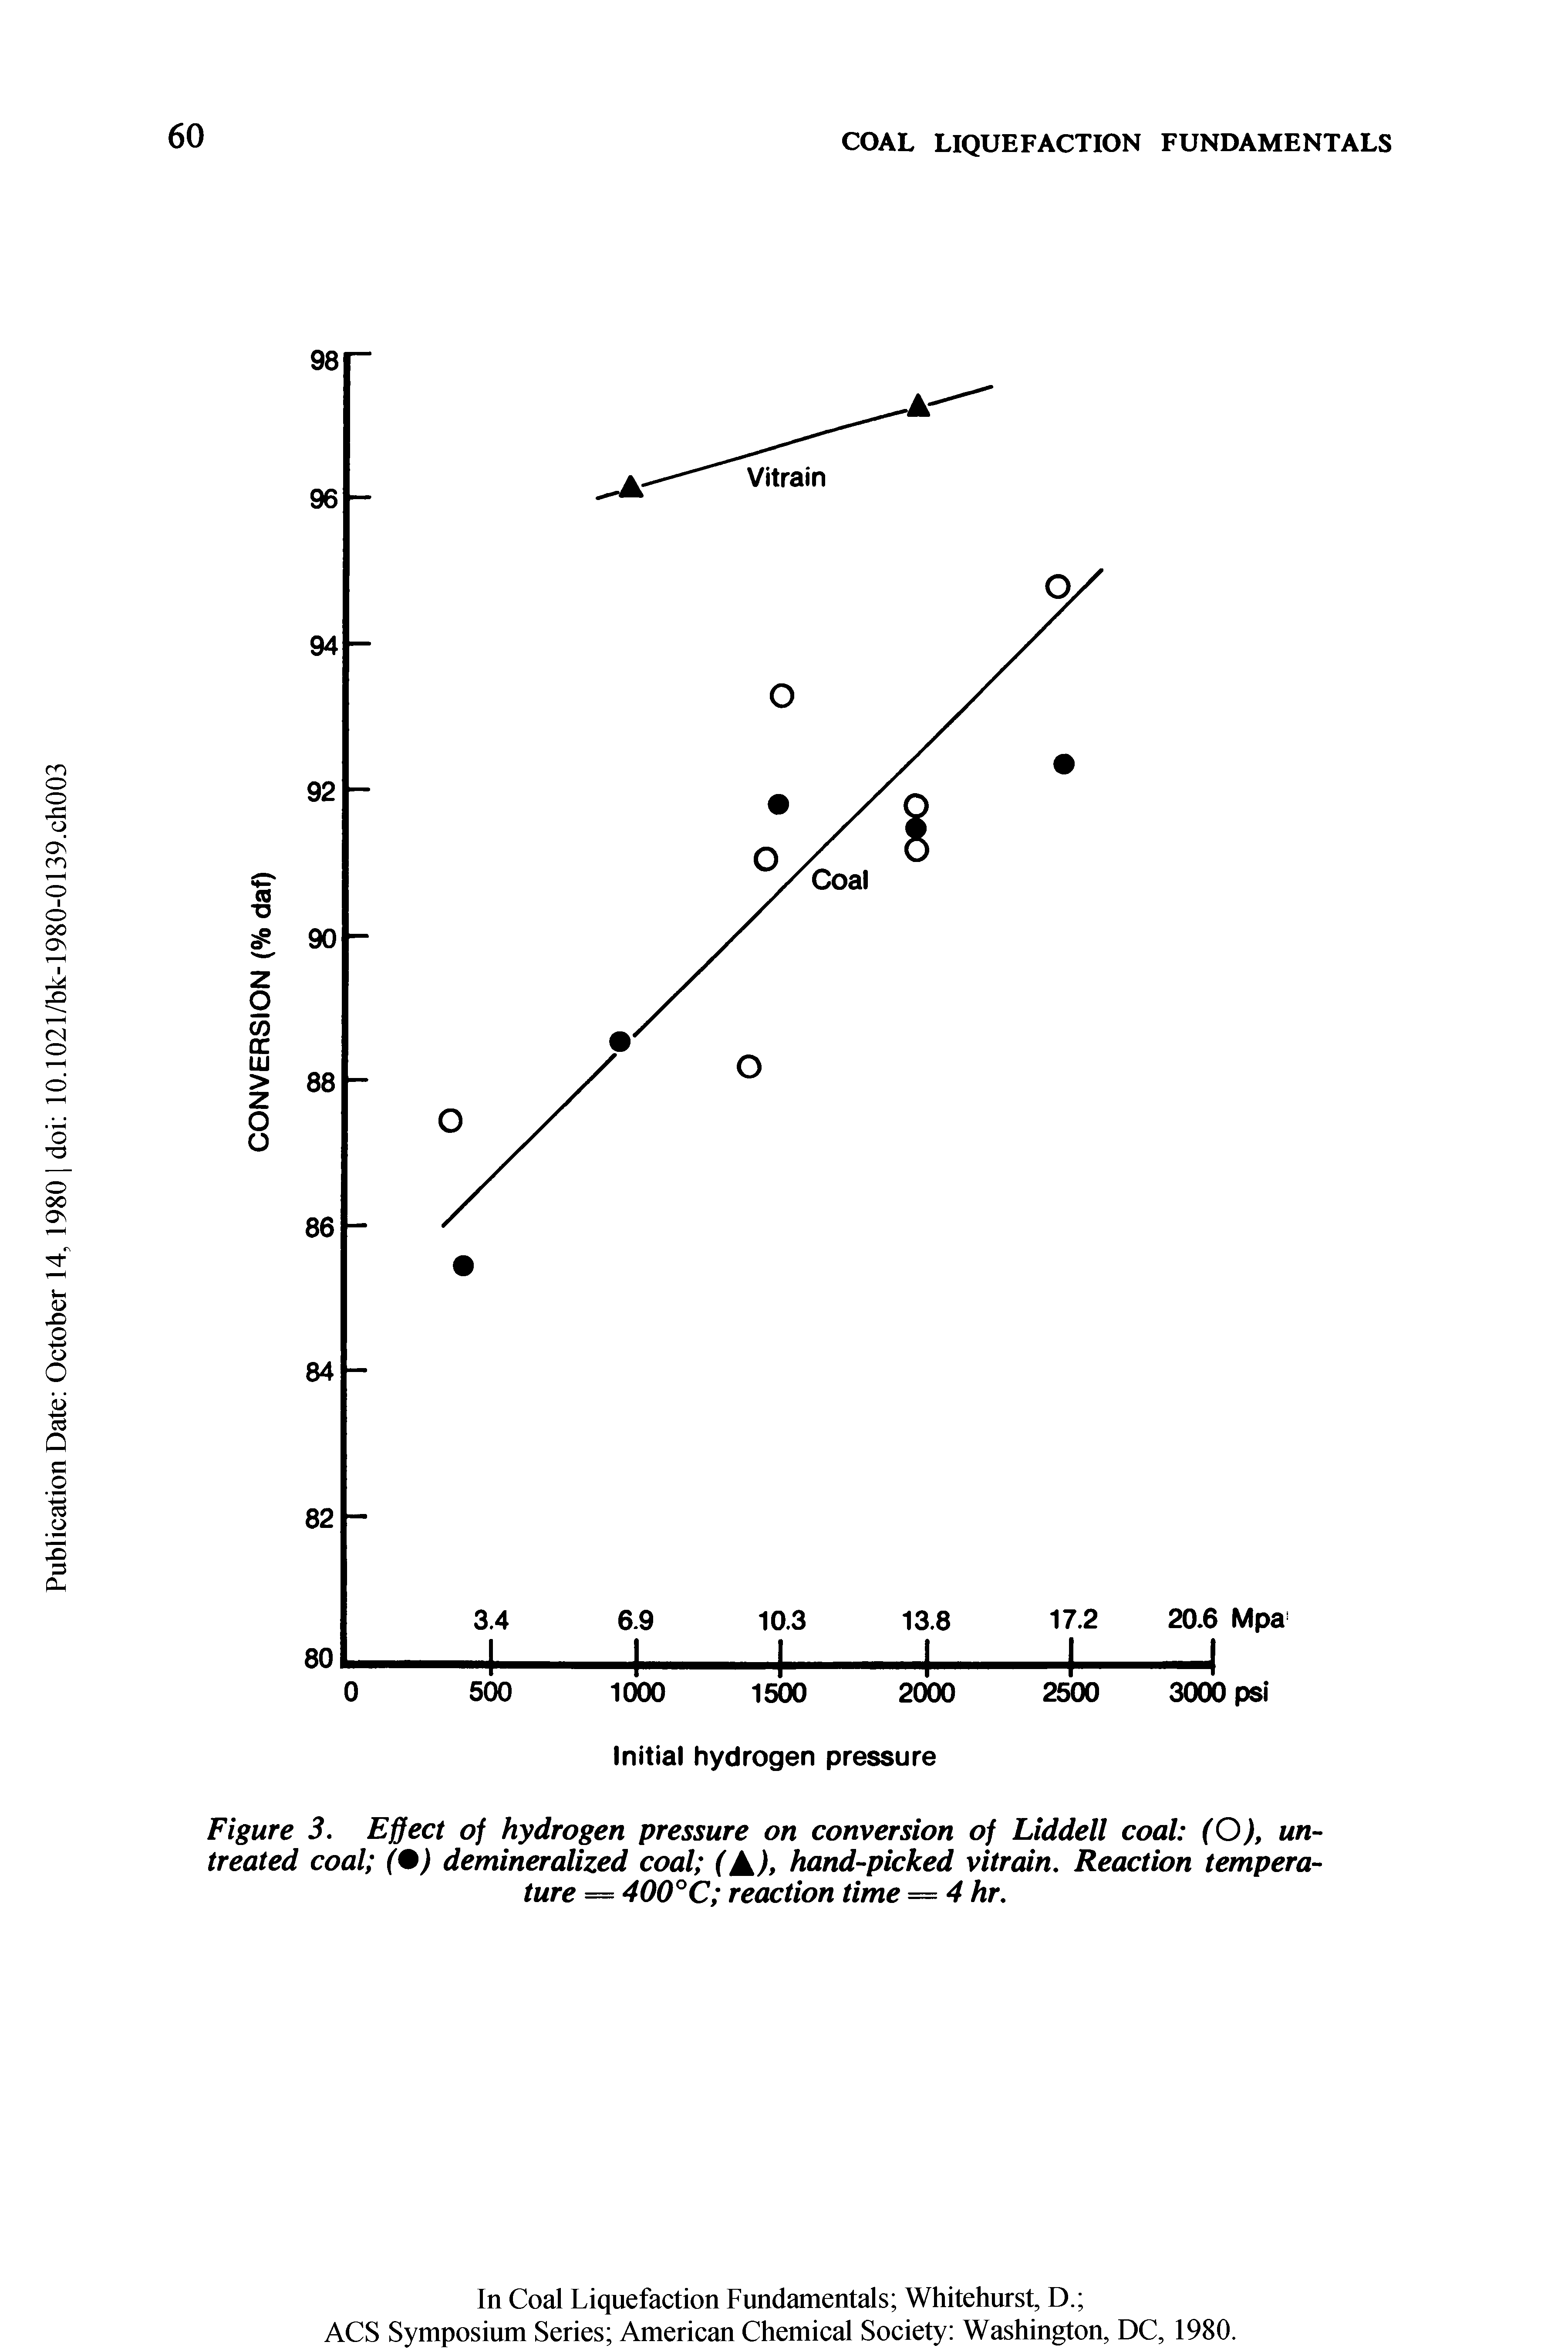 Figure 3. Effect of hydrogen pressure on conversion of Liddell coal (O), untreated coal (+) demineralized coal (A), hand-picked vitrain. Reaction temperature = 400°C reaction time = 4 hr.